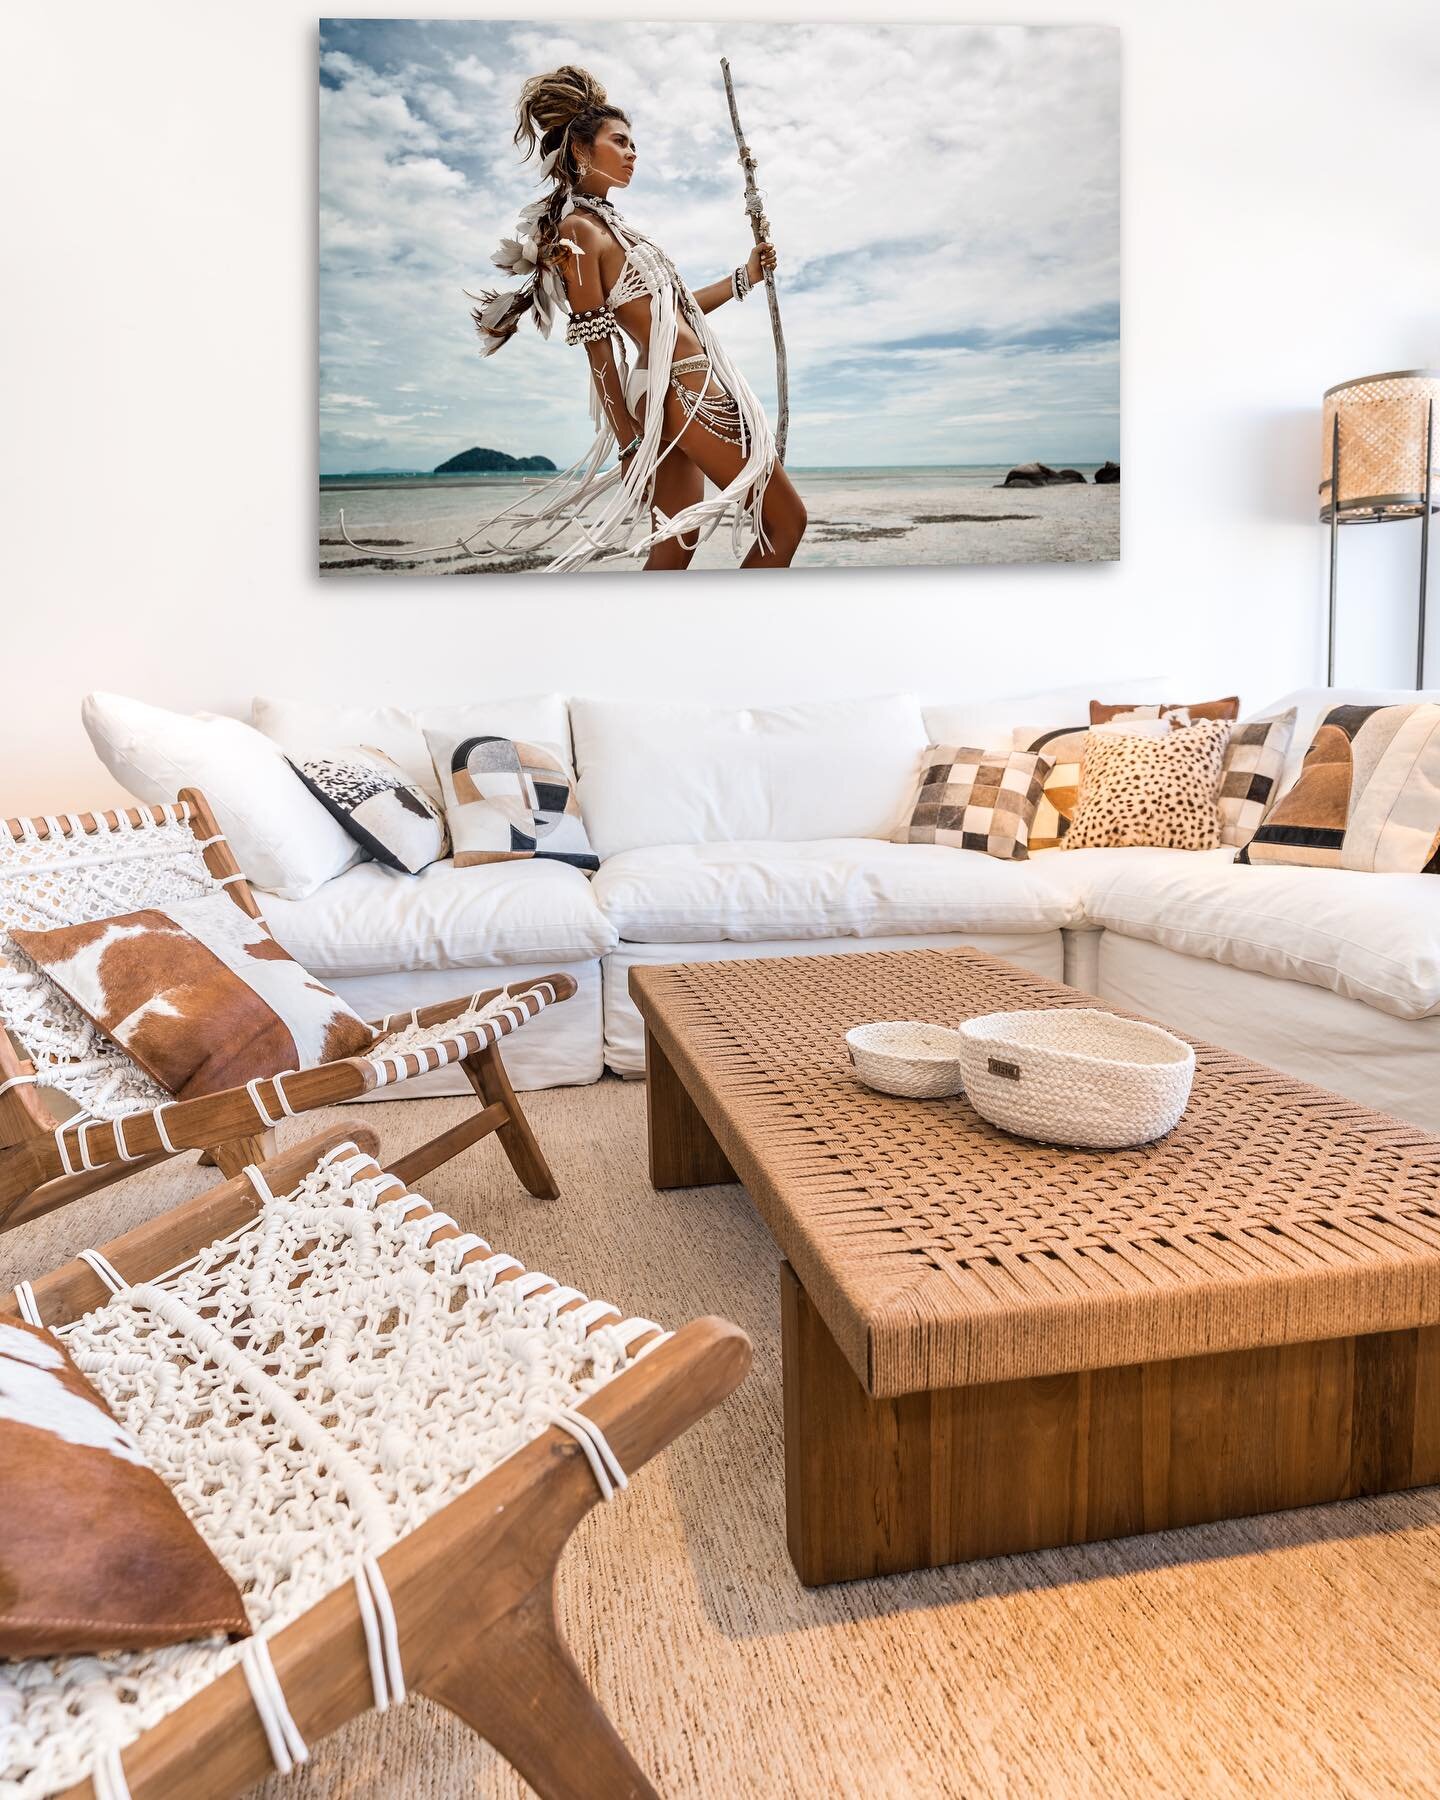 At @abouthouseibiza , we believe that furniture is more than just functional. It&rsquo;s also a way to express your personality and style. That&rsquo;s why we have a huge variety of sofas, beds, tables and chairs for you to choose from.